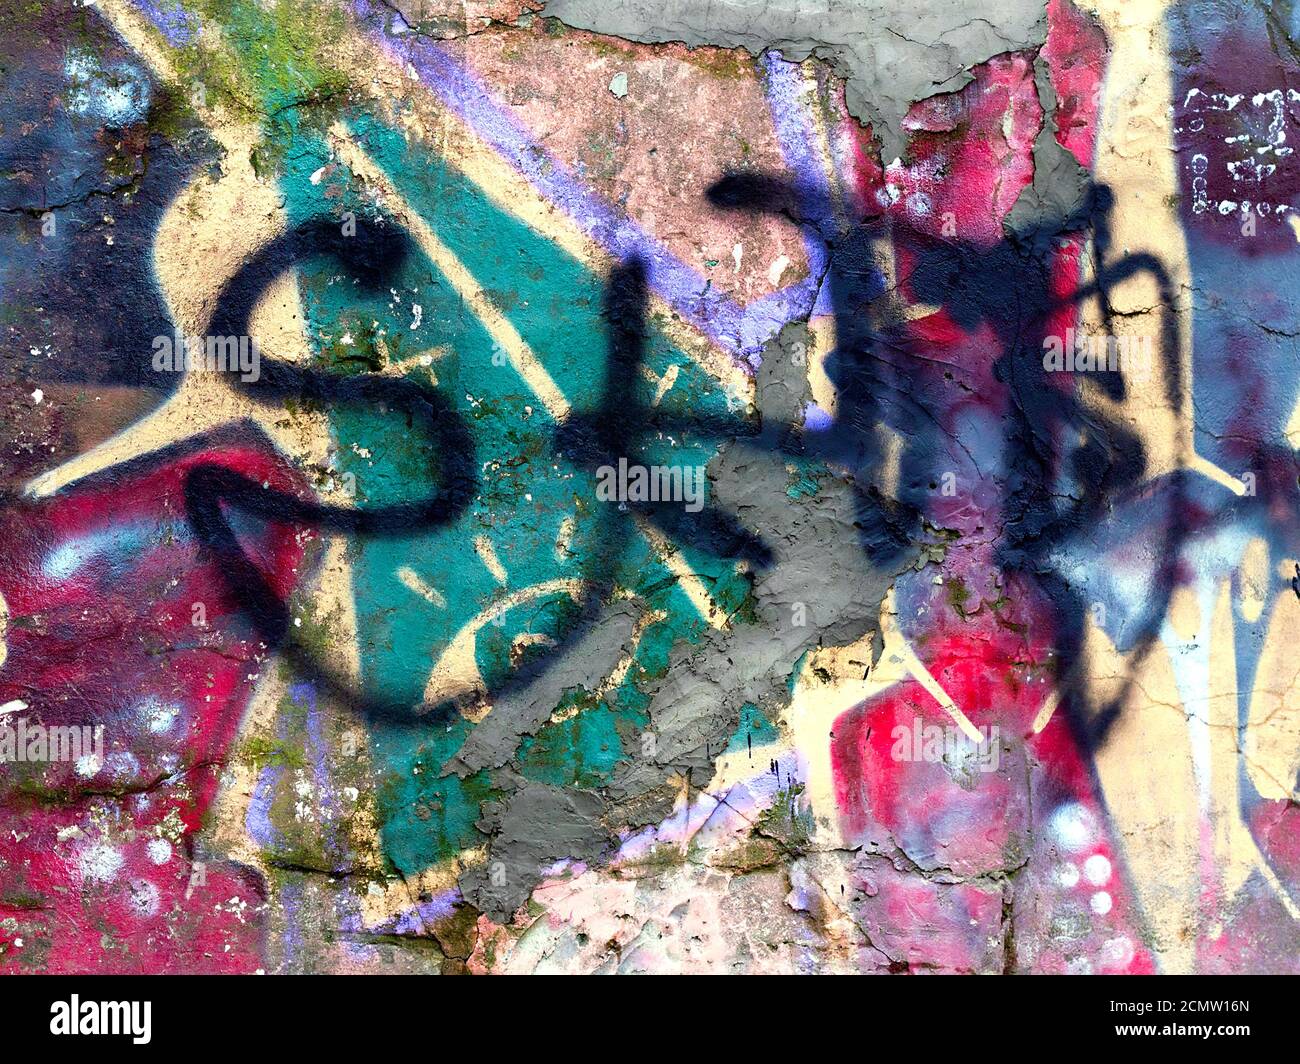 piece of graffiti images on an old brick wall as background Stock Photo